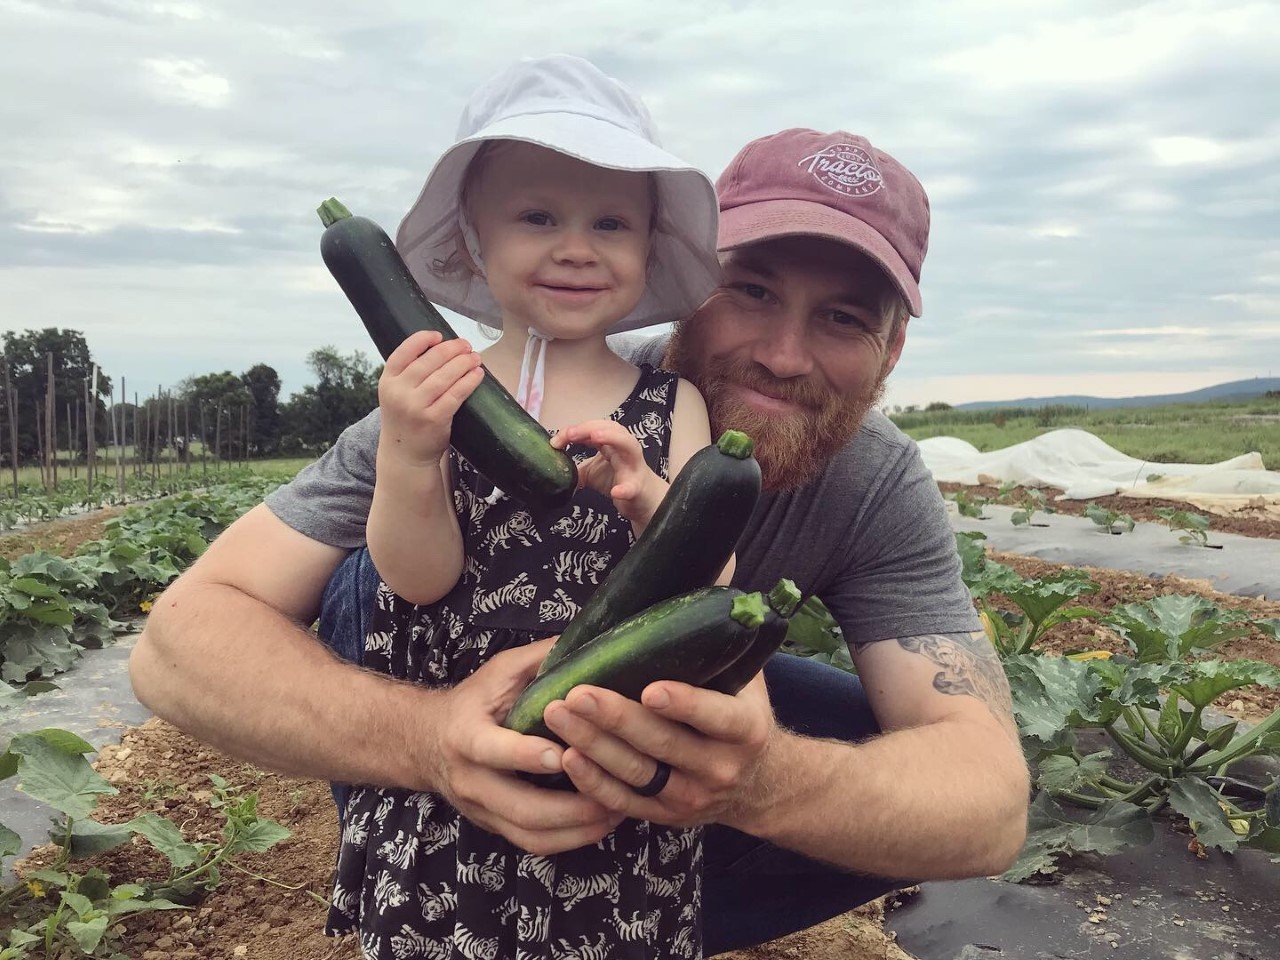 Friday CSA: Dickinson College Farm Field Notes for Week of July 22nd